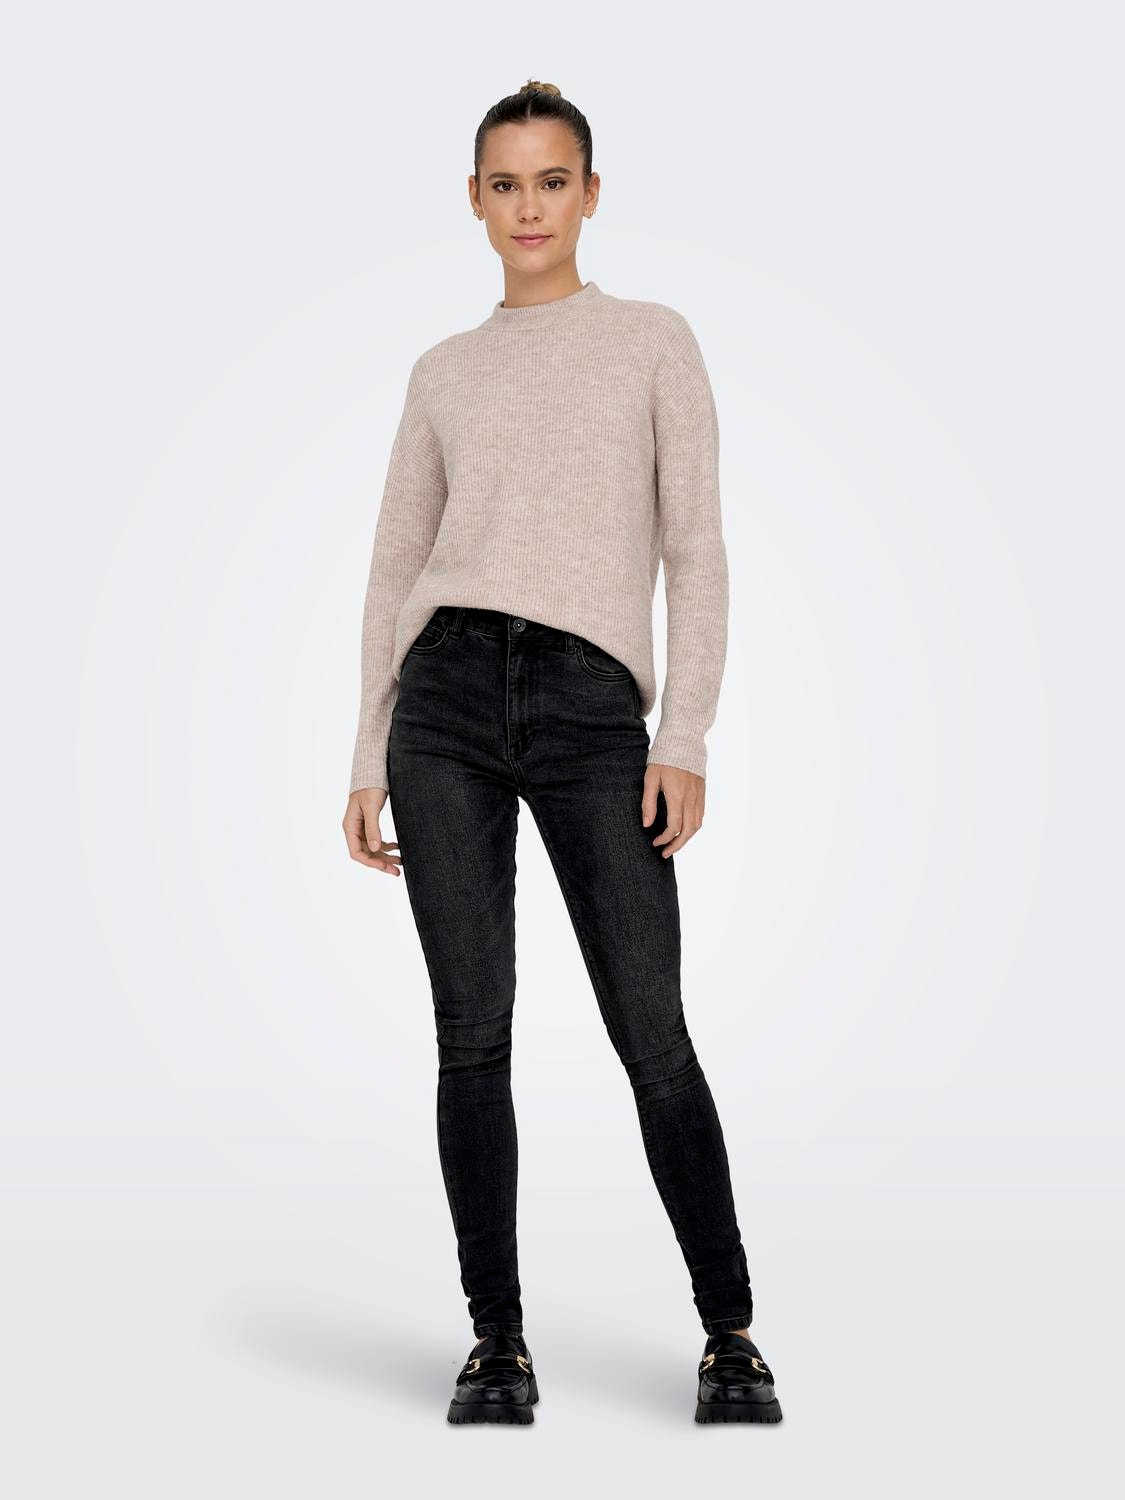 ONLY Jeans Skinny Fit Taille haute -Black - 15309884